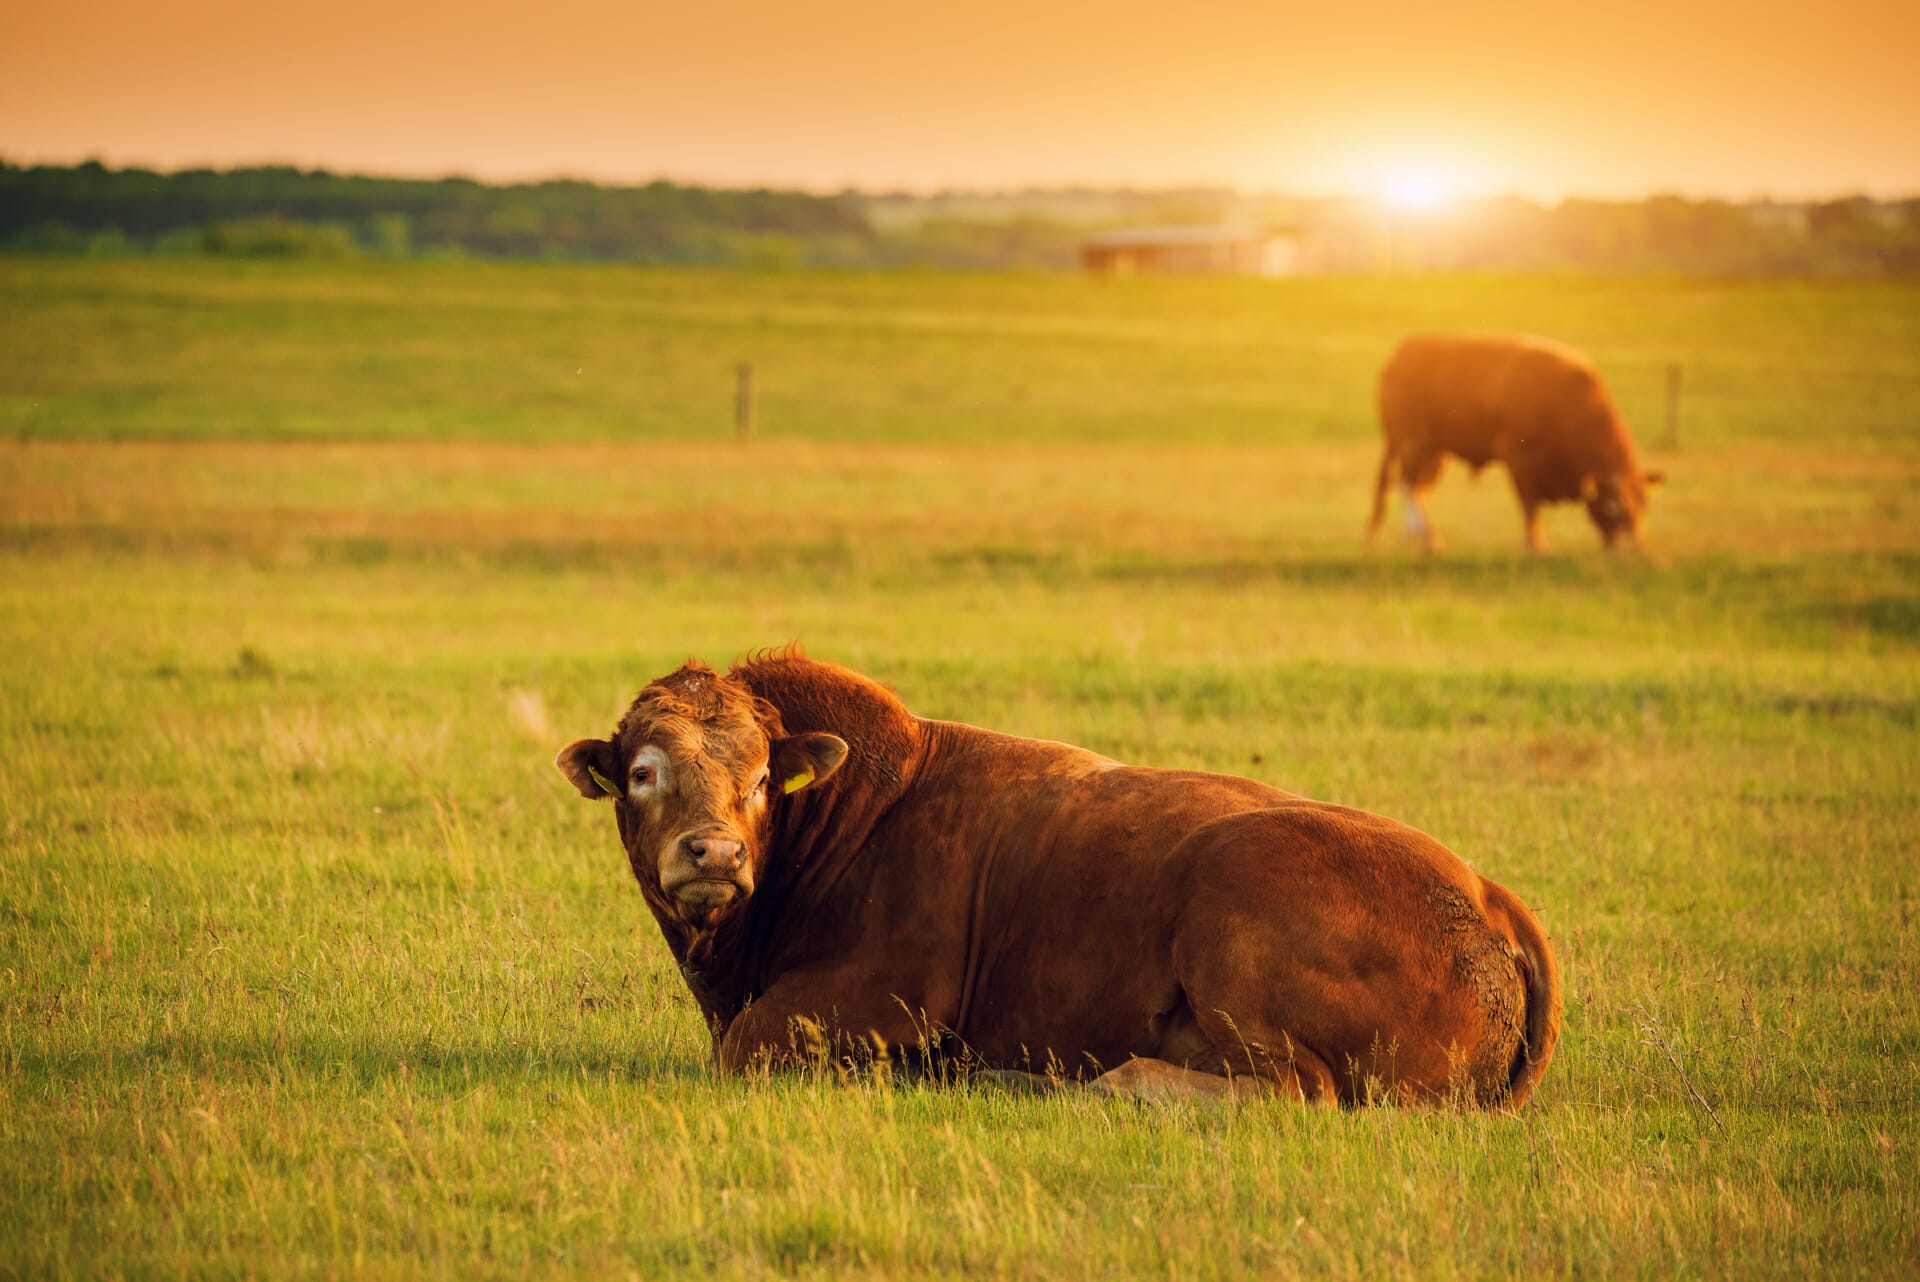 Oklahoma meat processors favorite cow in a landscape with a Limusin cow laying in the grass in front of a beautiful sunset.